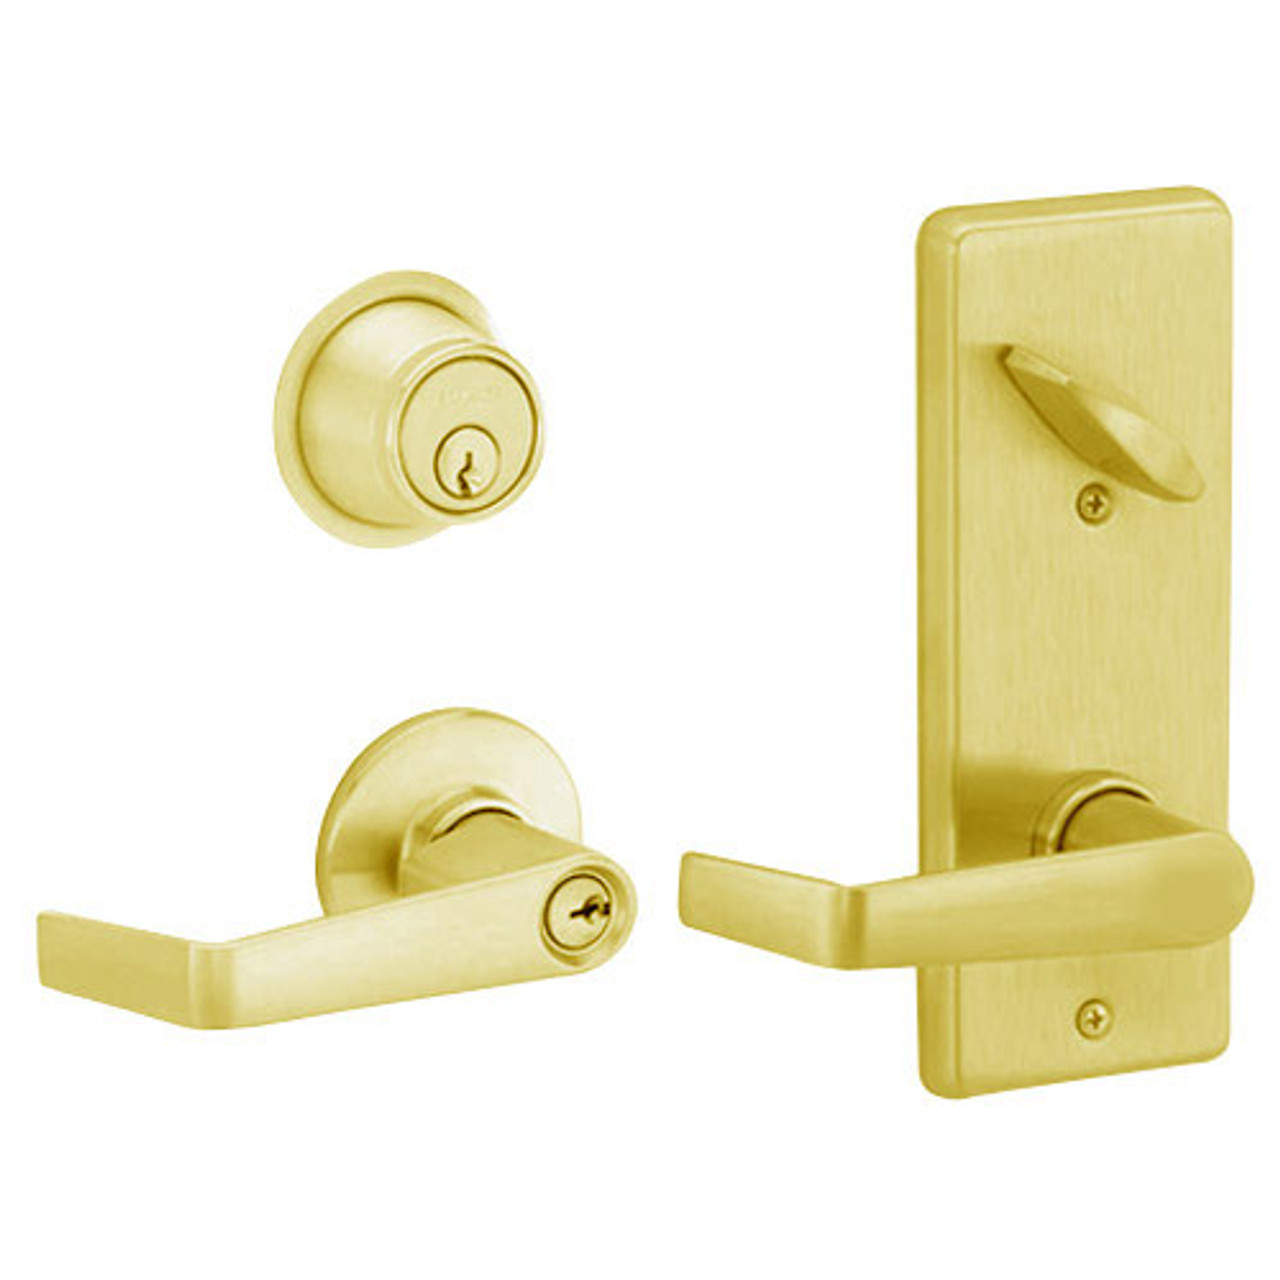 S280PD-SAT-605 Schlage S280PD Saturn Style Interconnected Lock in Bright Brass